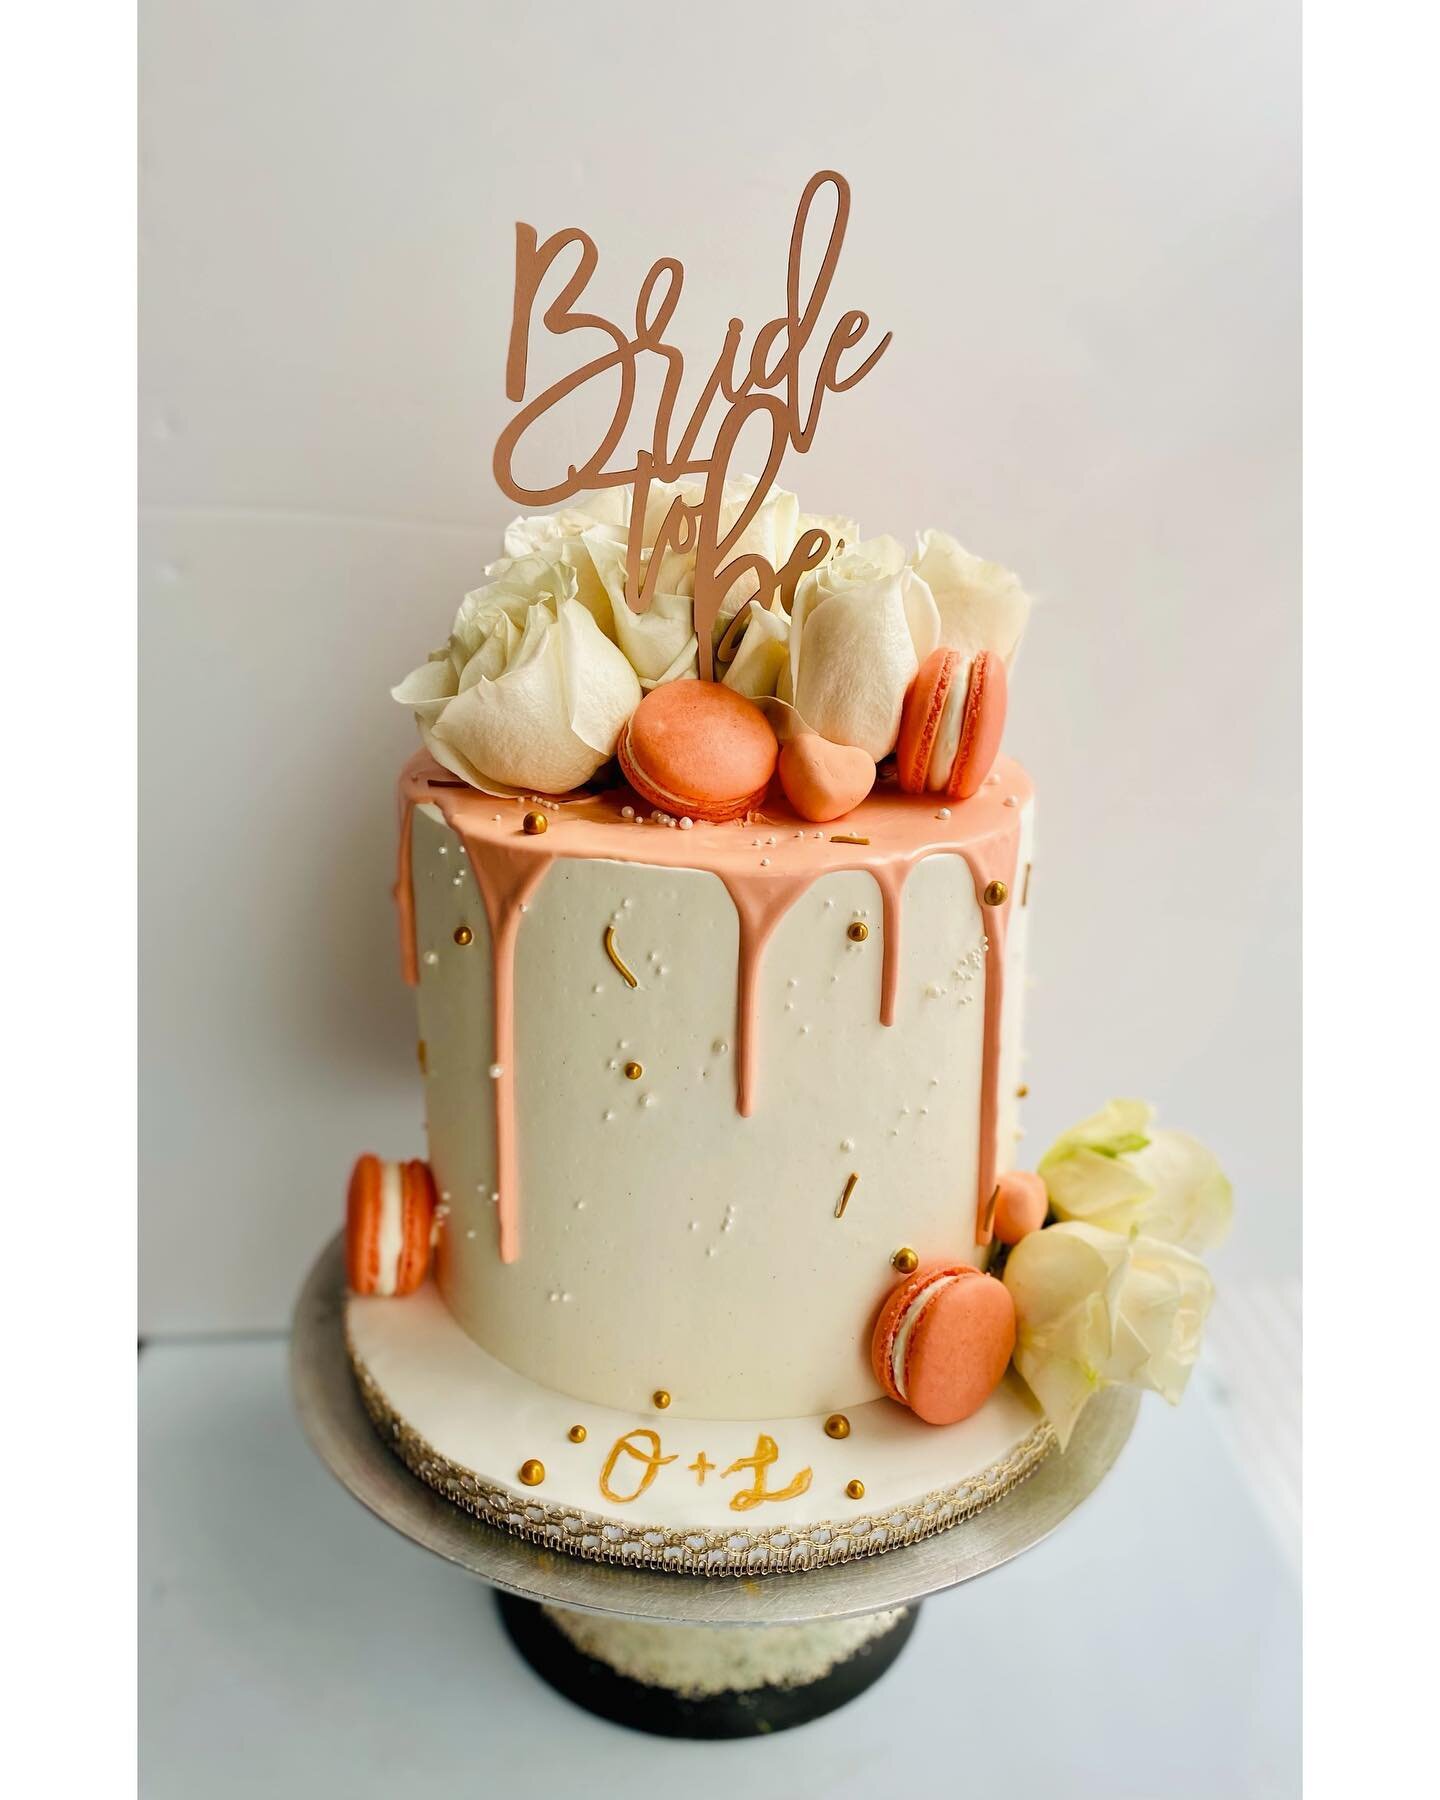 Engagement cake with simple details to make the Bride shine ✨ peach color macarons, fondant hearts and white flowers on a simple white cake with light peach drip 🤍 
.
.
.
.
.
.
.
.
#bridetobe #engagementcake #peachcolormacaron #whiteroses #dripcake 